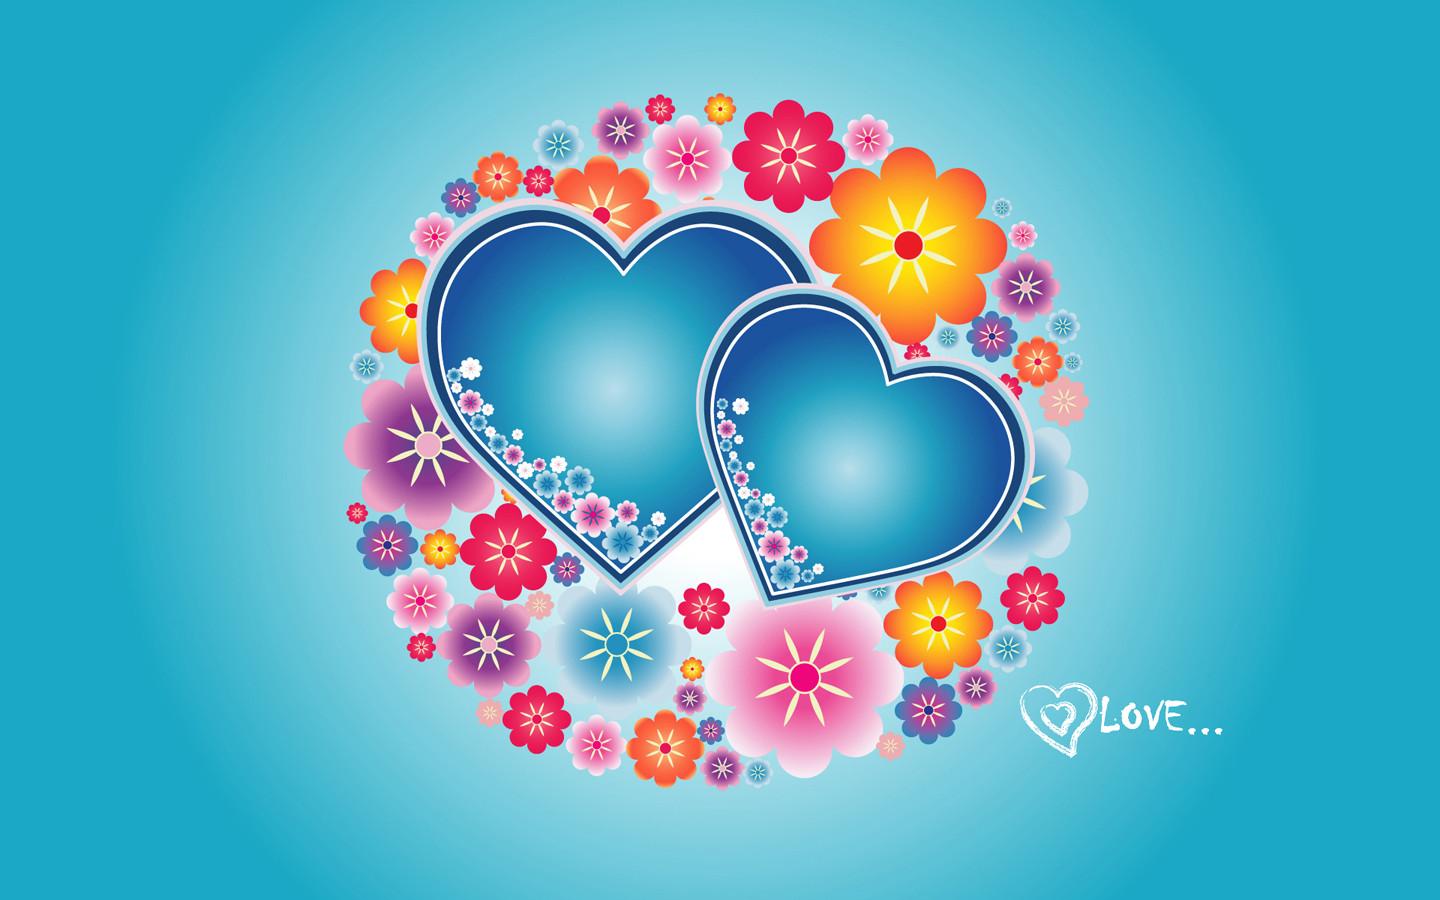 Love Heart Images, Pictures, Wallpaper Download Free